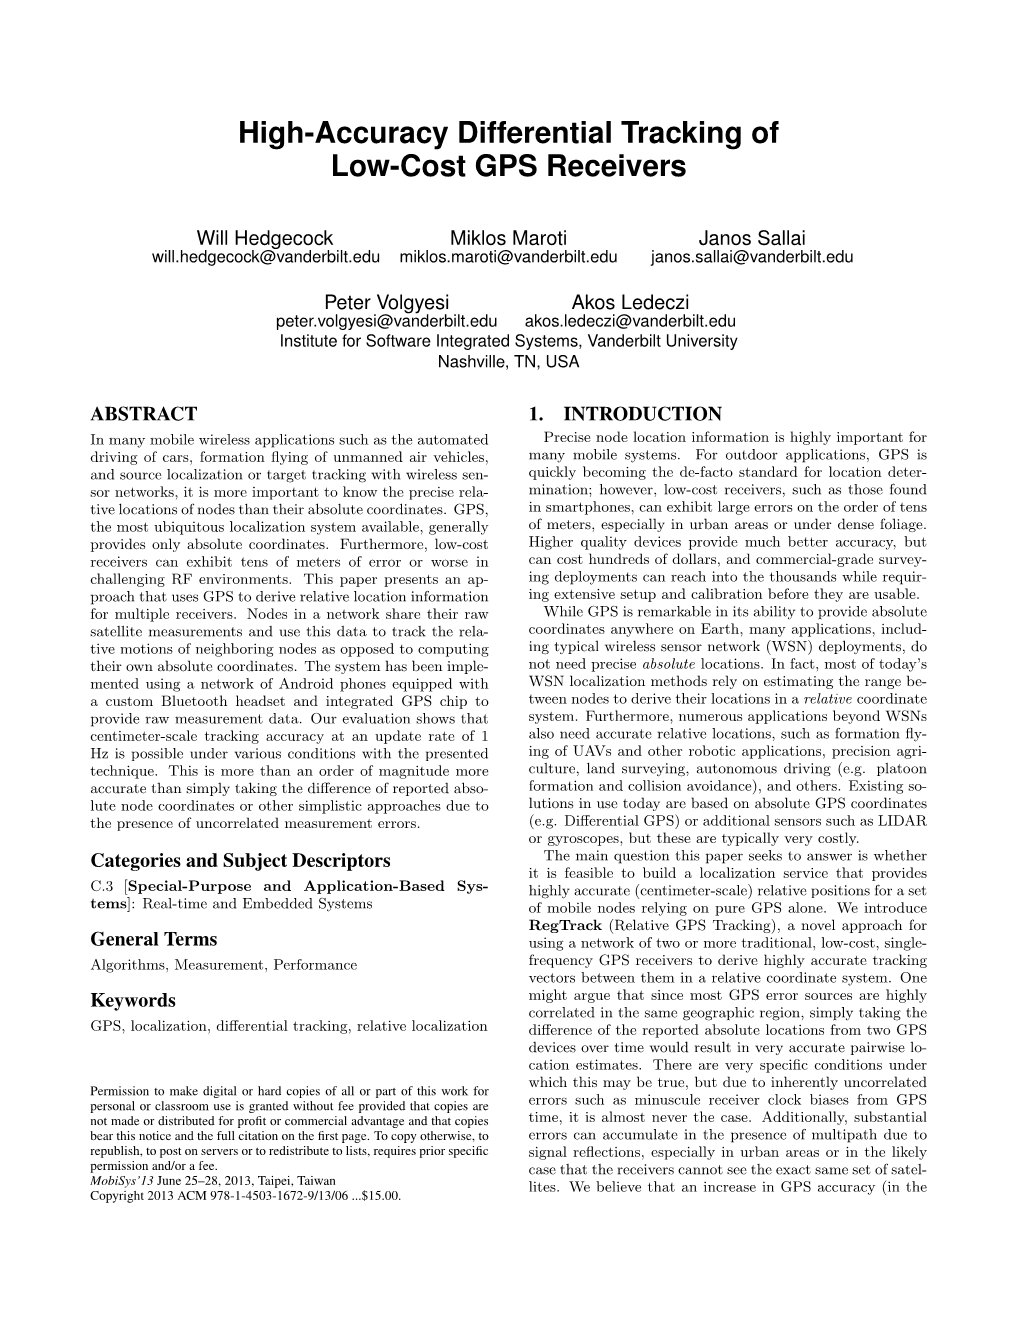 High-Accuracy Differential Tracking of Low-Cost GPS Receivers